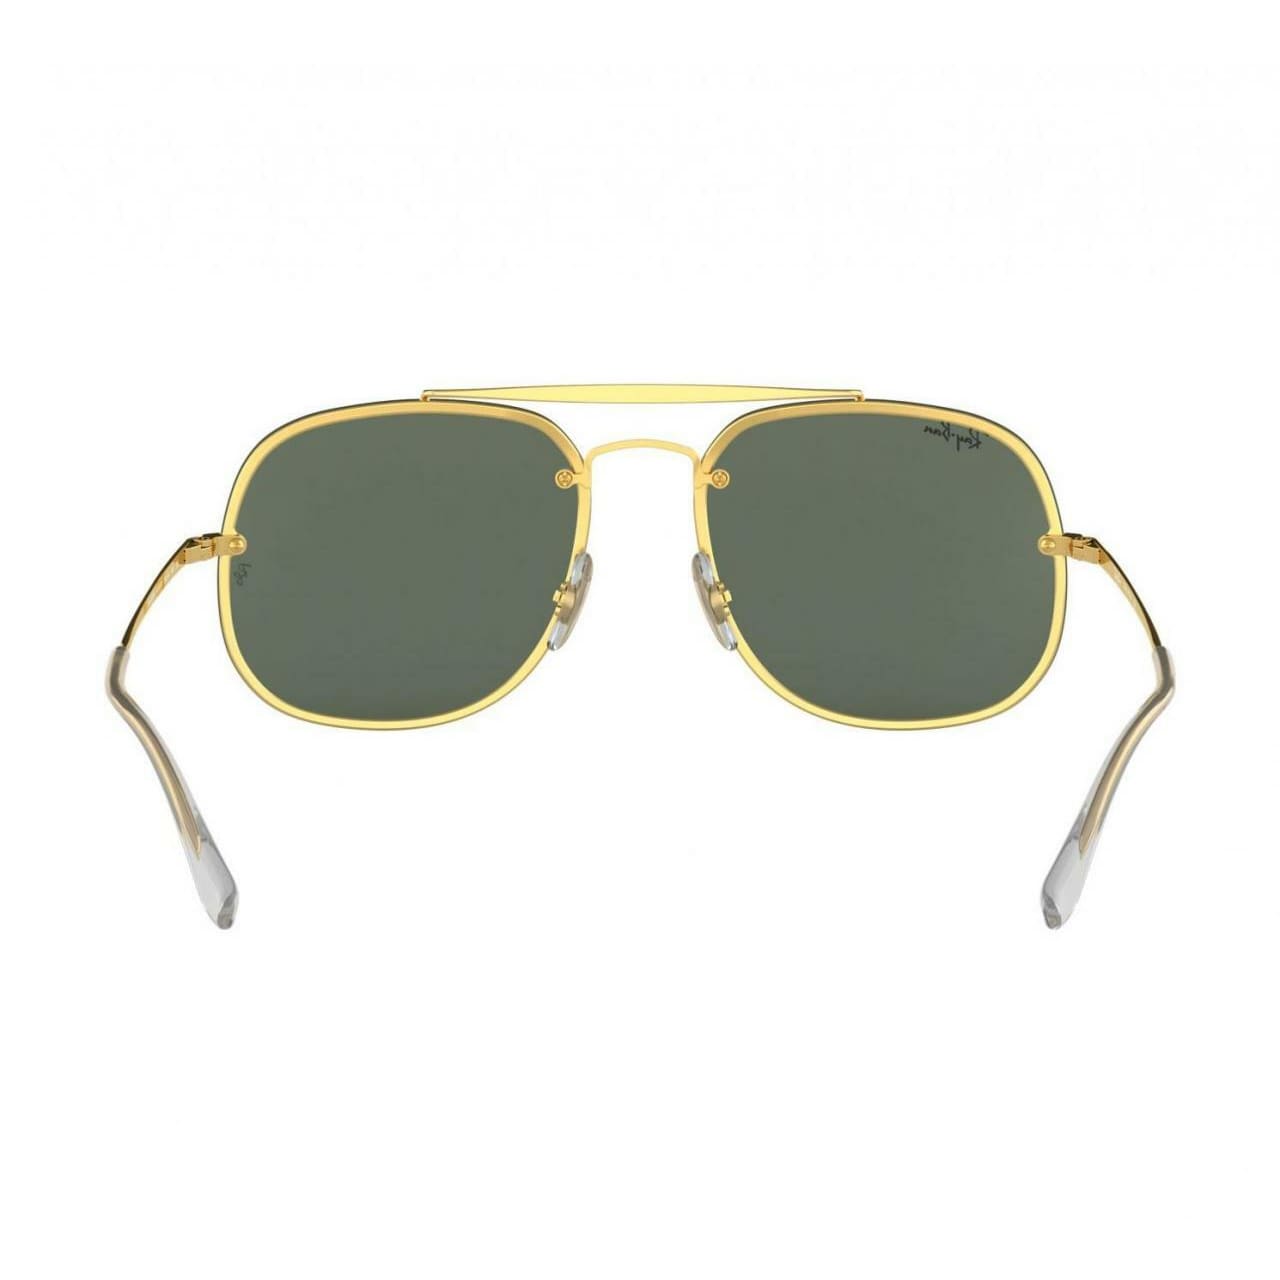 Ray-Ban RB3583N-905071 Blaze General Gold Square Green Classic Lenses Steel Sunglasses Frames 8053672866568